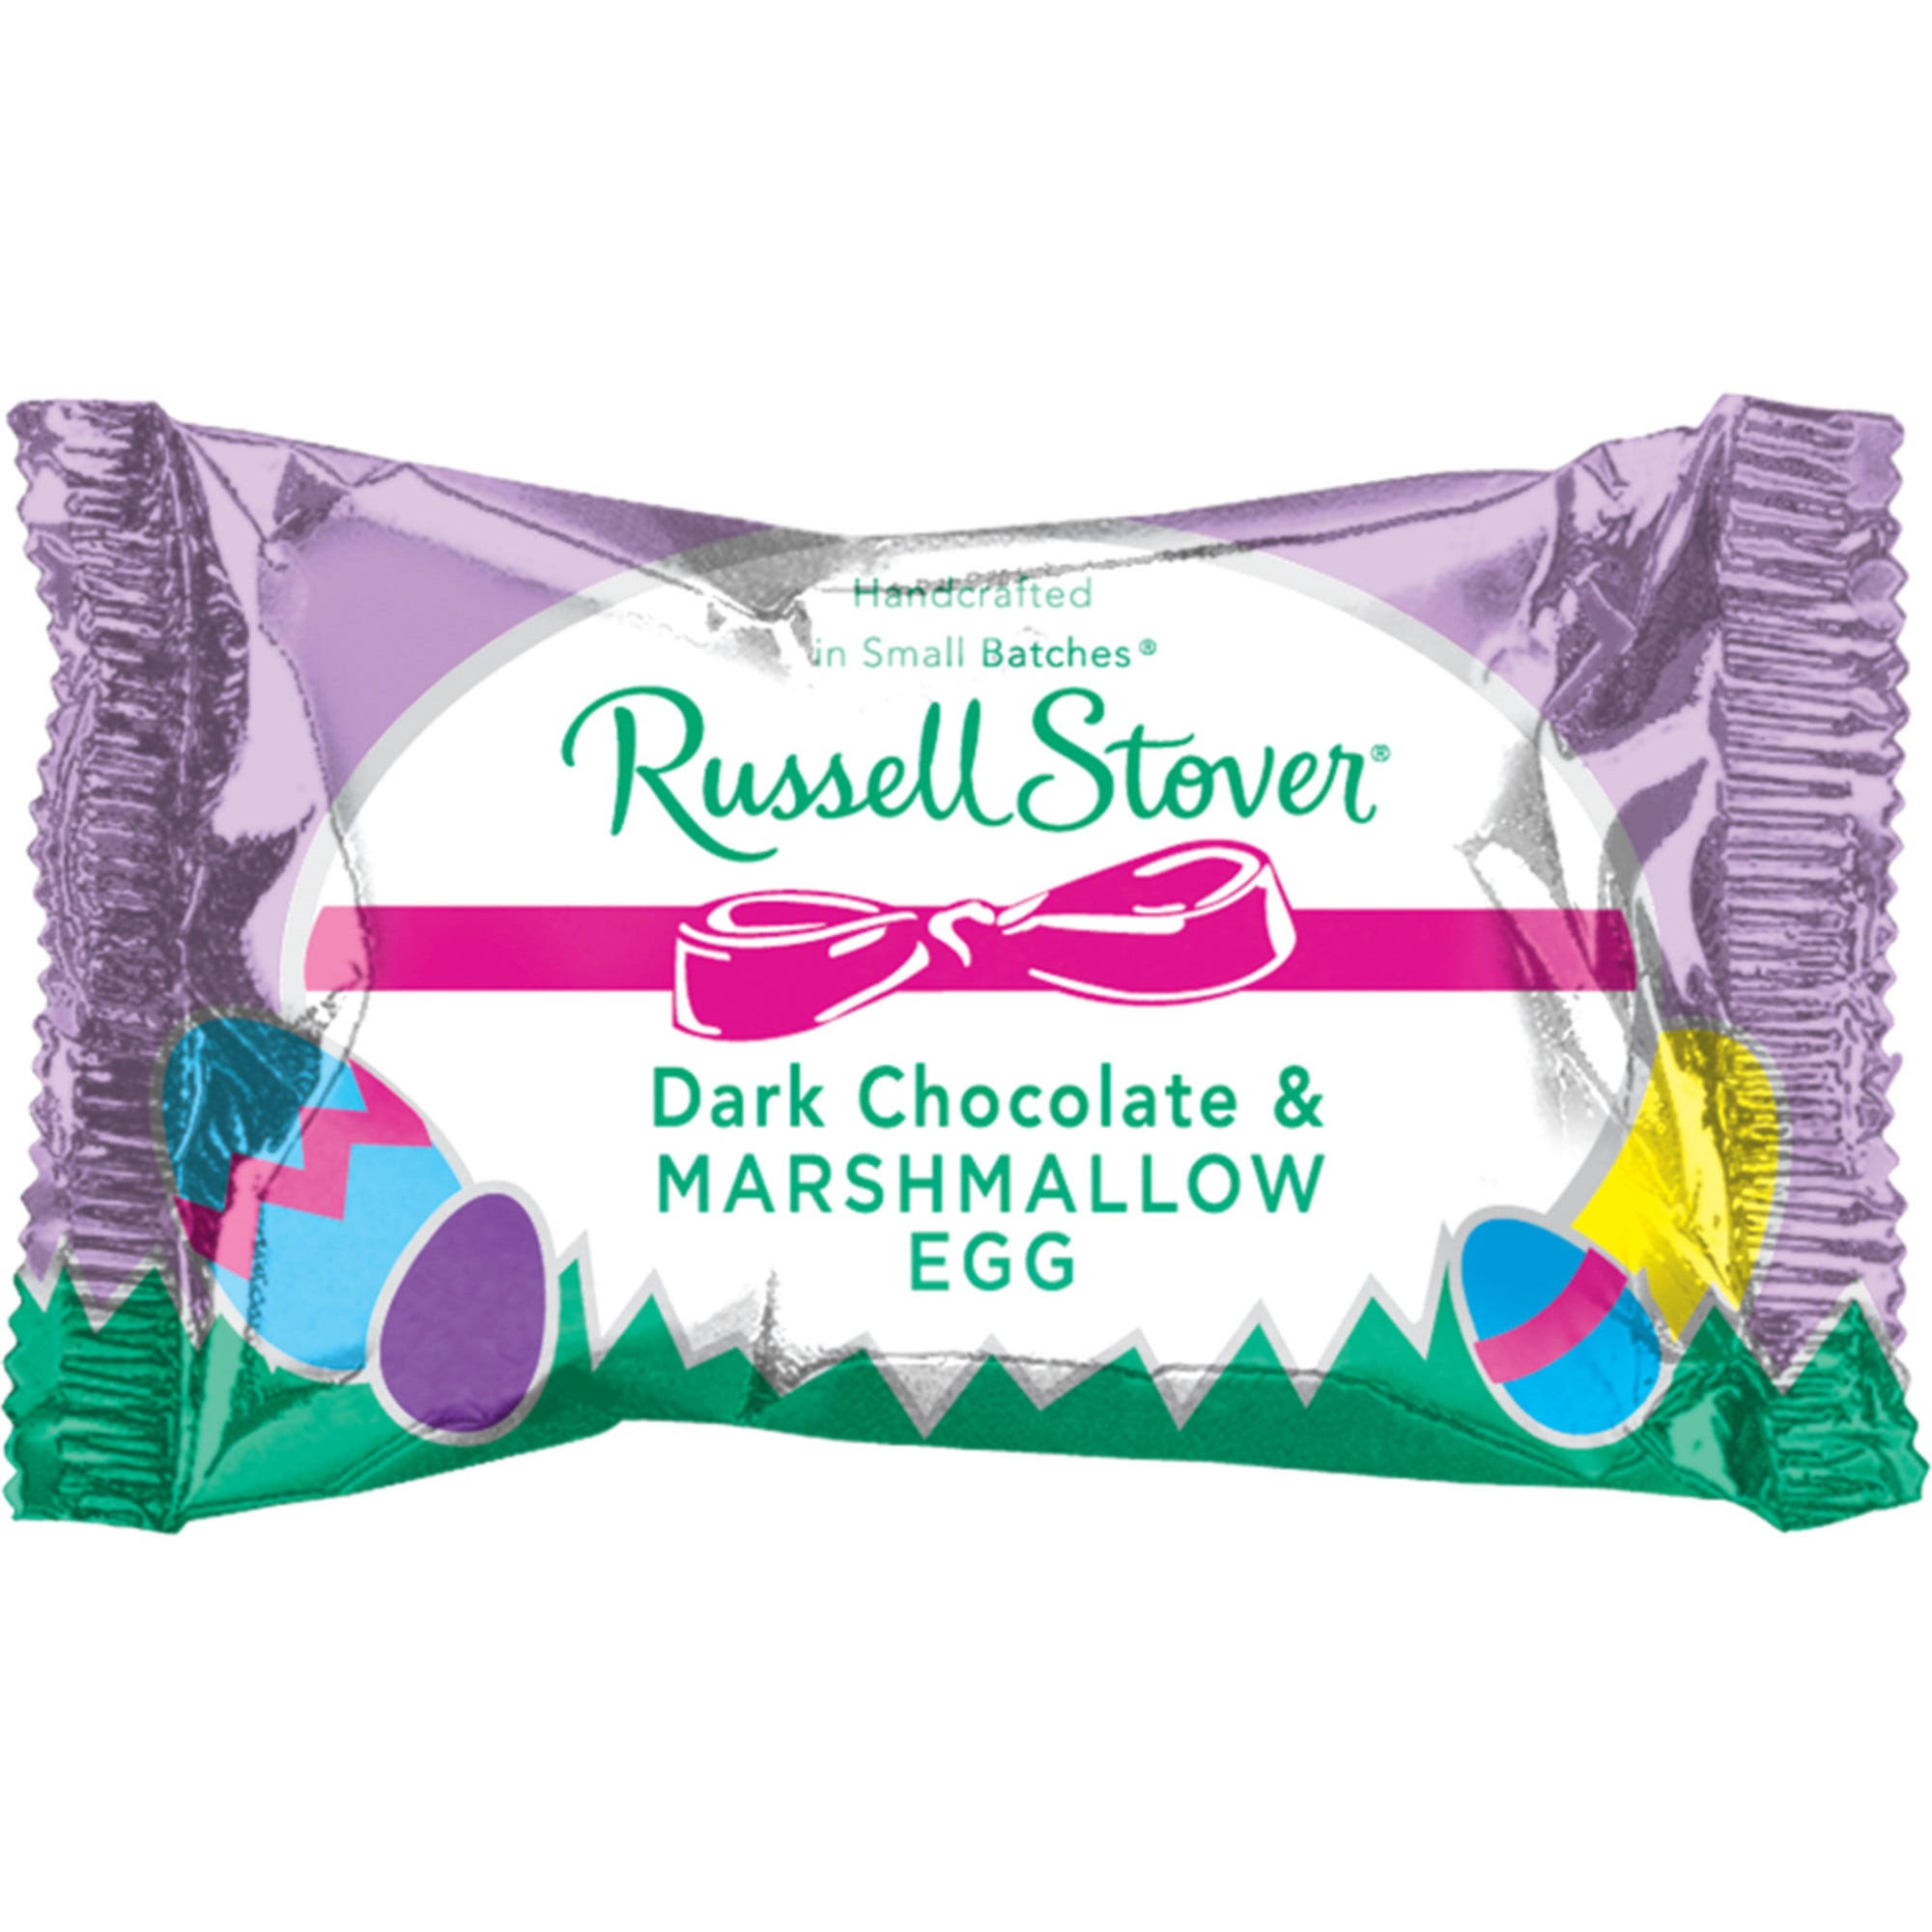 Russell Stover Dark Chocolate & Marshmallow Egg